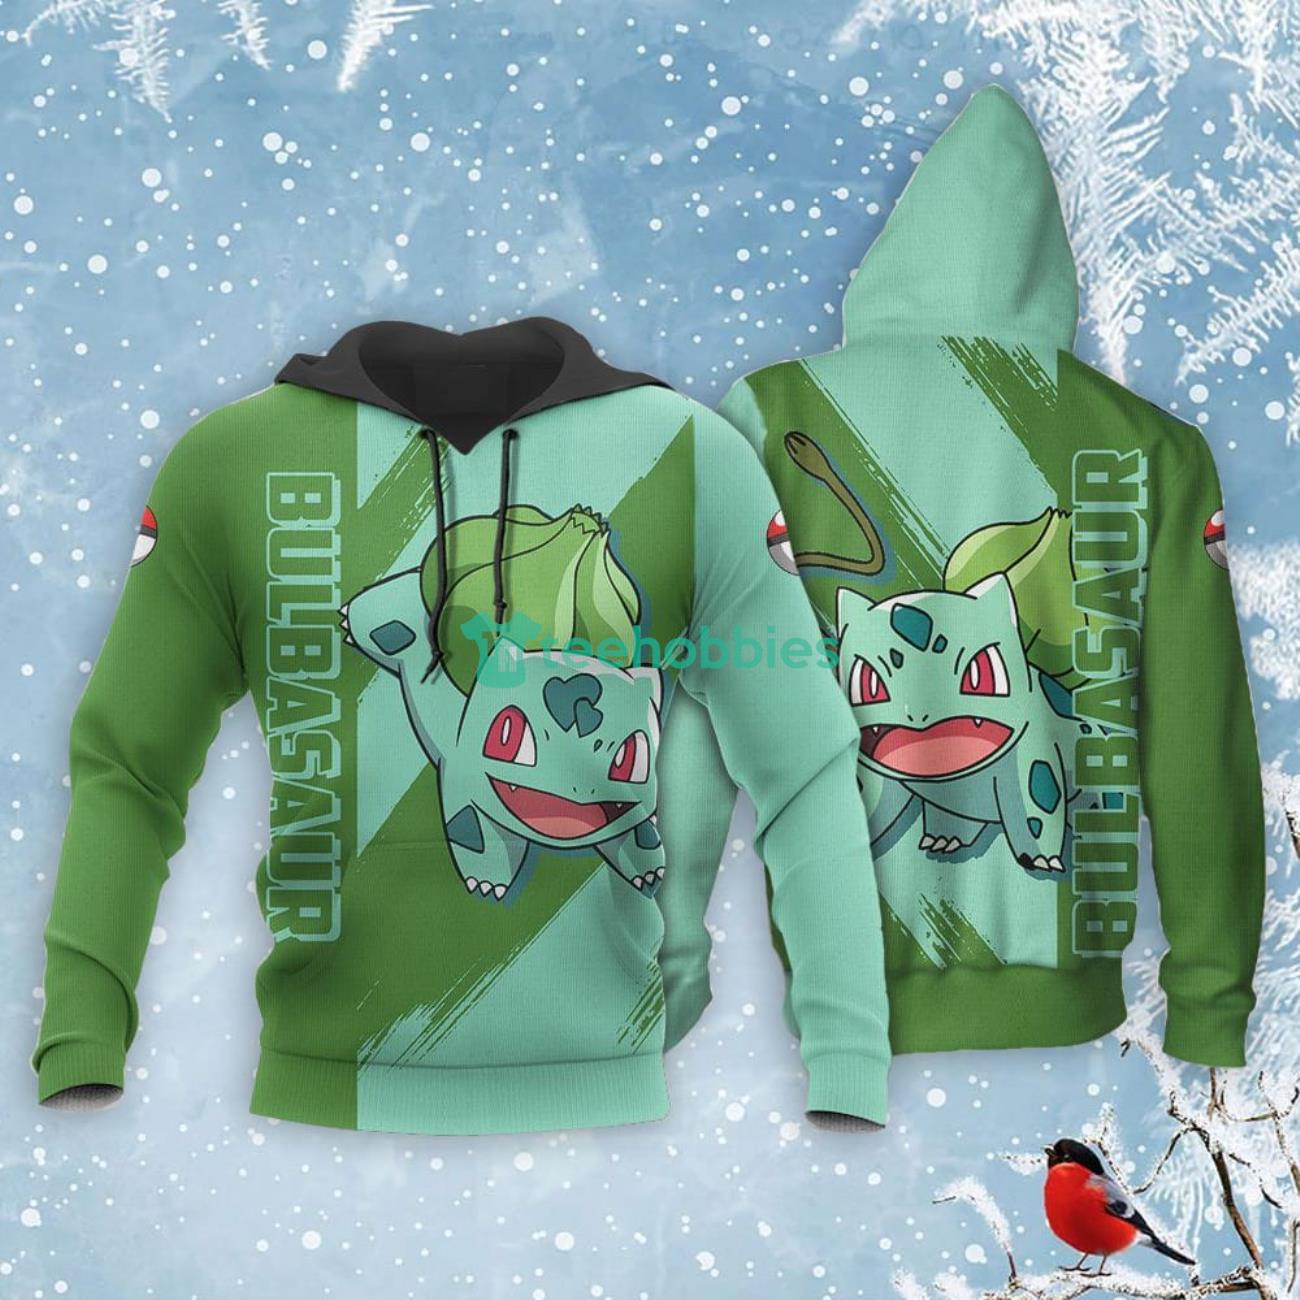 Pokemon Bulbasaur All Over Printed 3D Shirt Anime Fans Product Photo 3 Product photo 2